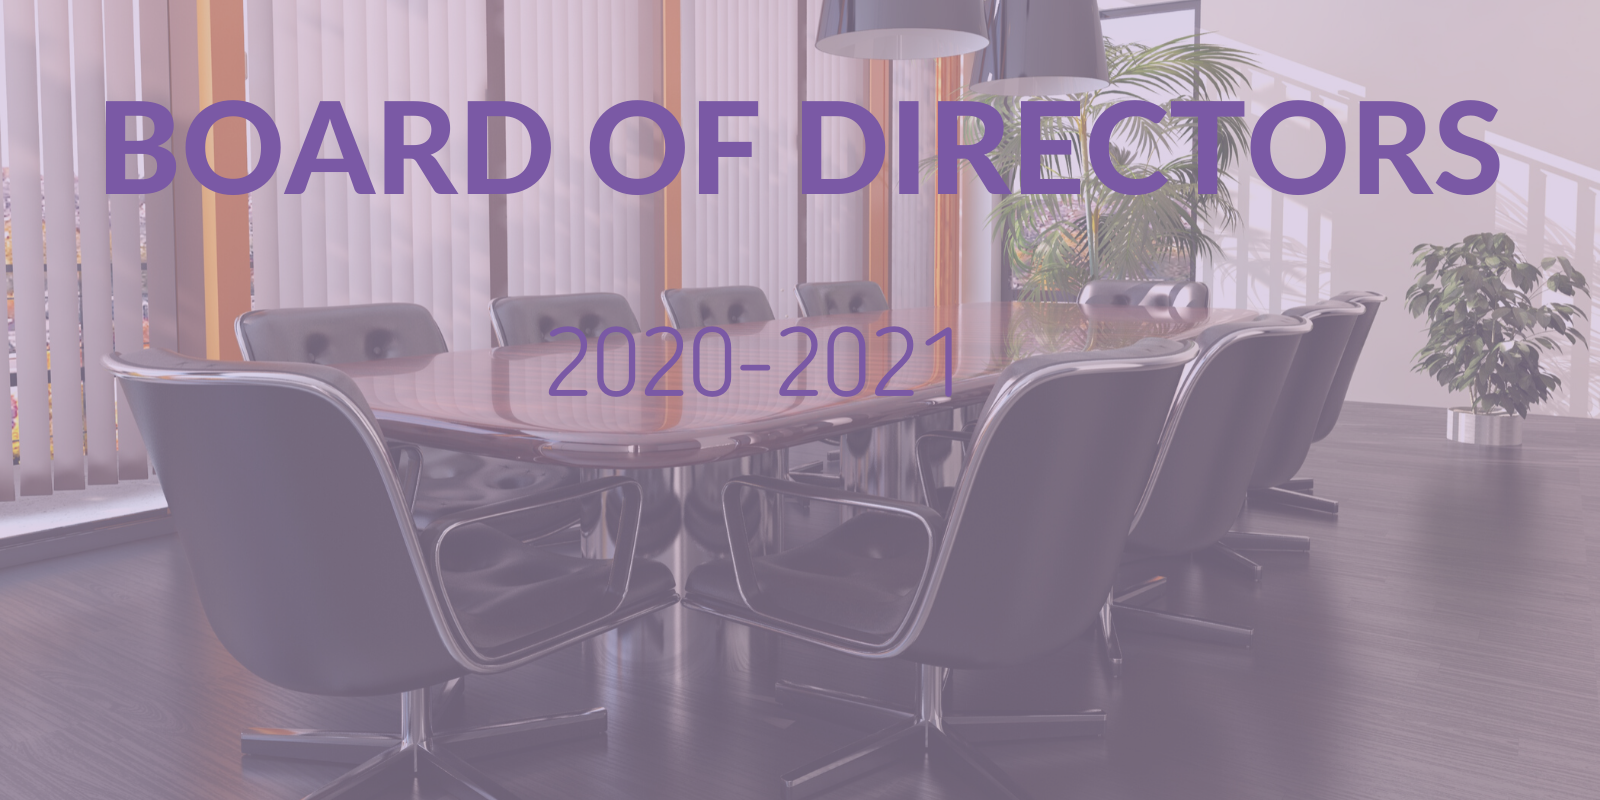 WIFT-T and the Foundation for WIFT-T announce 2020-2021 Boards of Directors